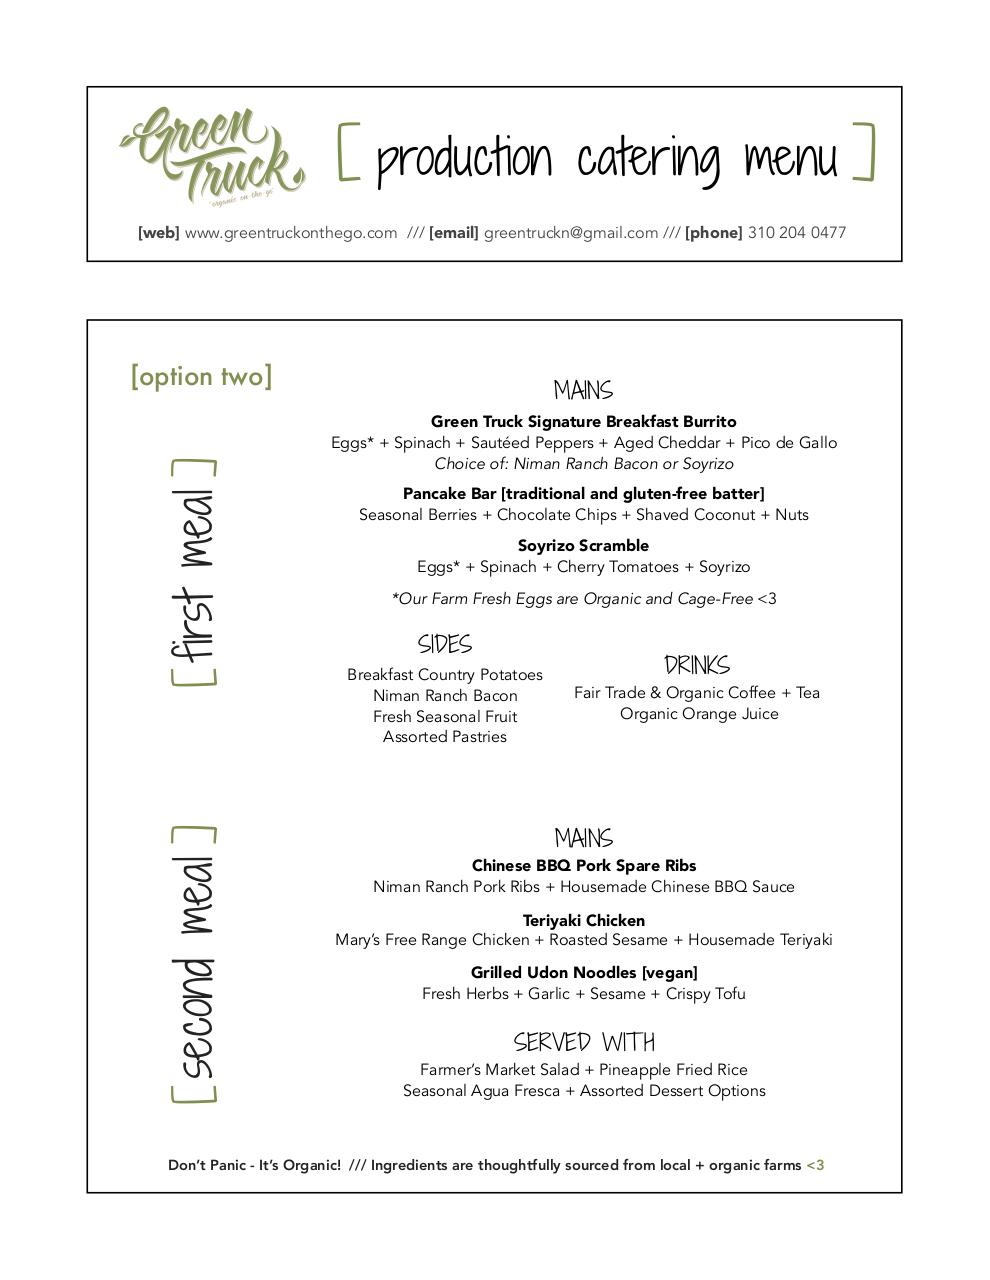 Green Truck Menu - Production Catering.pdf - page 2/6